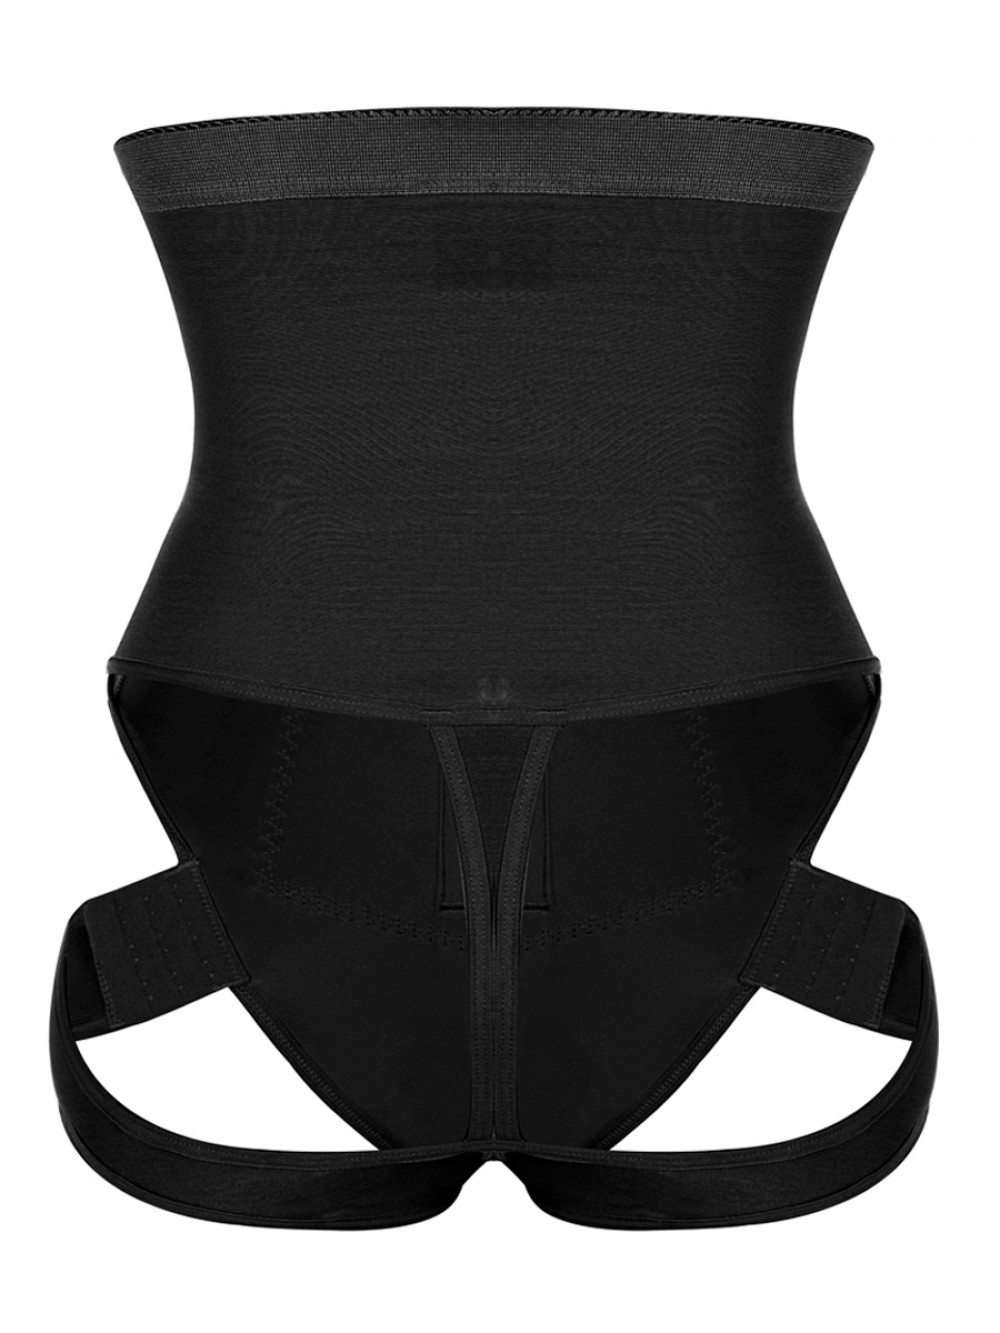 Black High Waist Butt Lifter With 2 Side Straps Body Shapewear